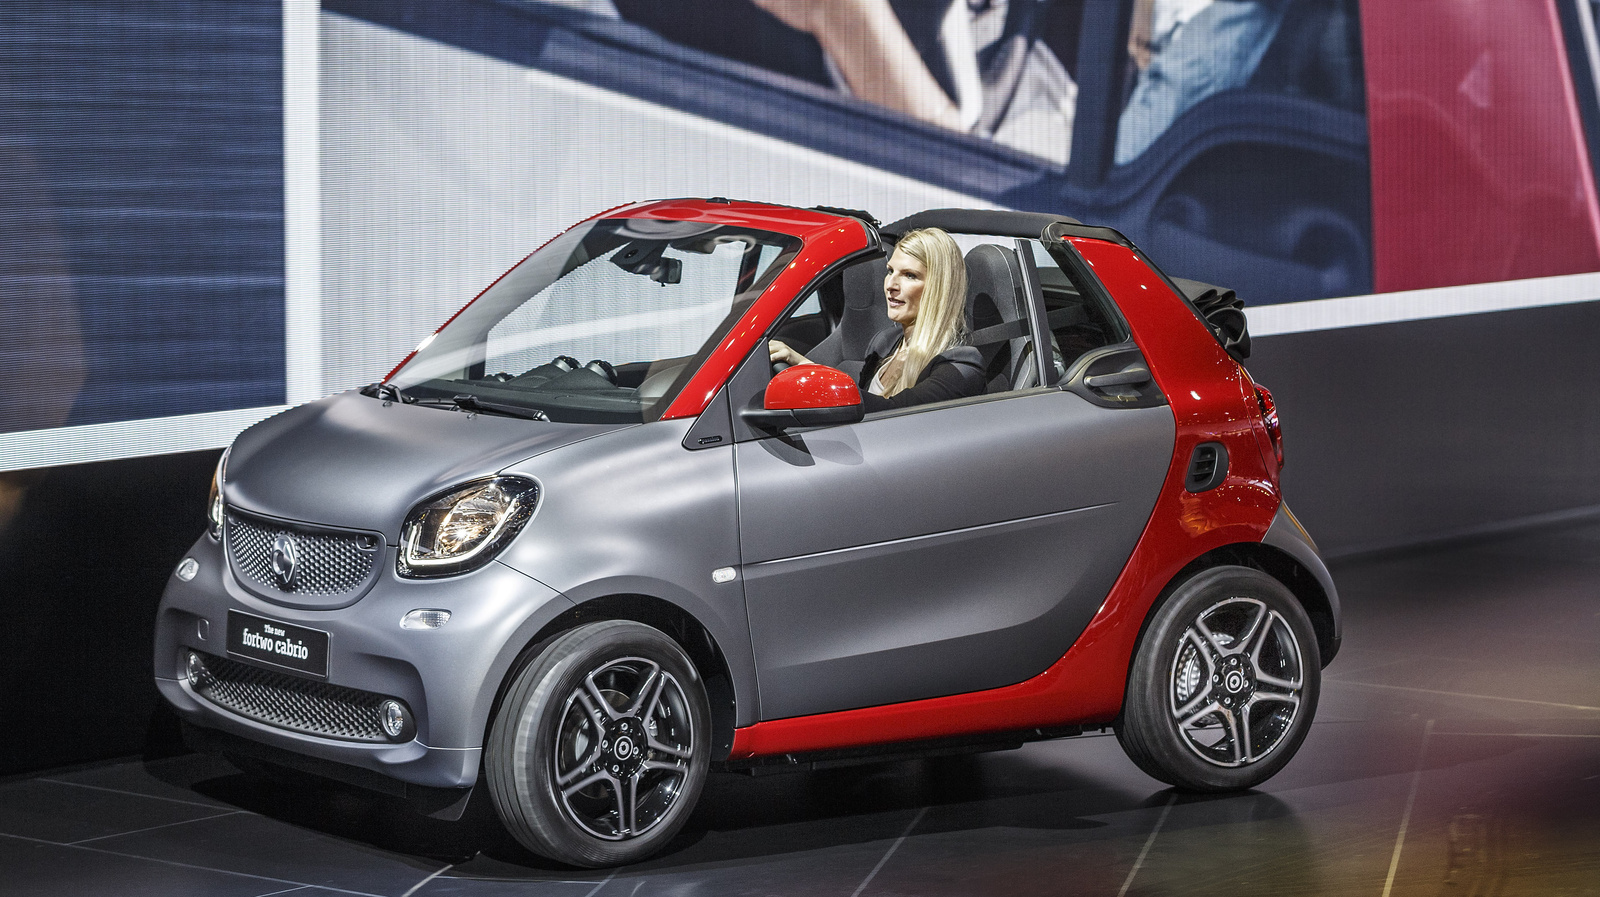 smart fortwo Test Drive Review - CarGurus